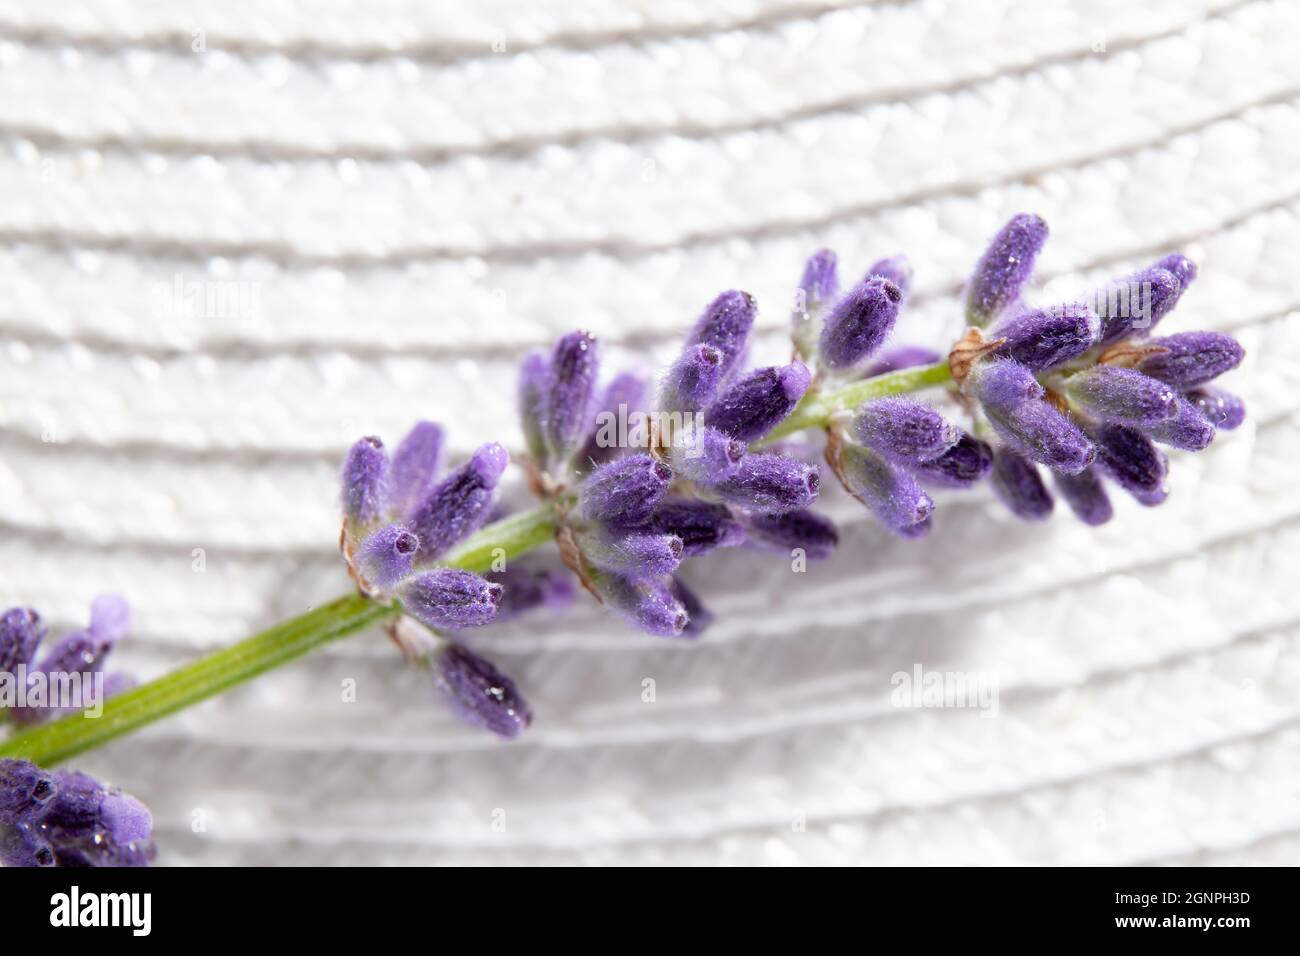 Close up view of Lavandula angustifolia also known as common lavender, true lavender or English lavender blossom on white background. Macro studio. Stock Photo